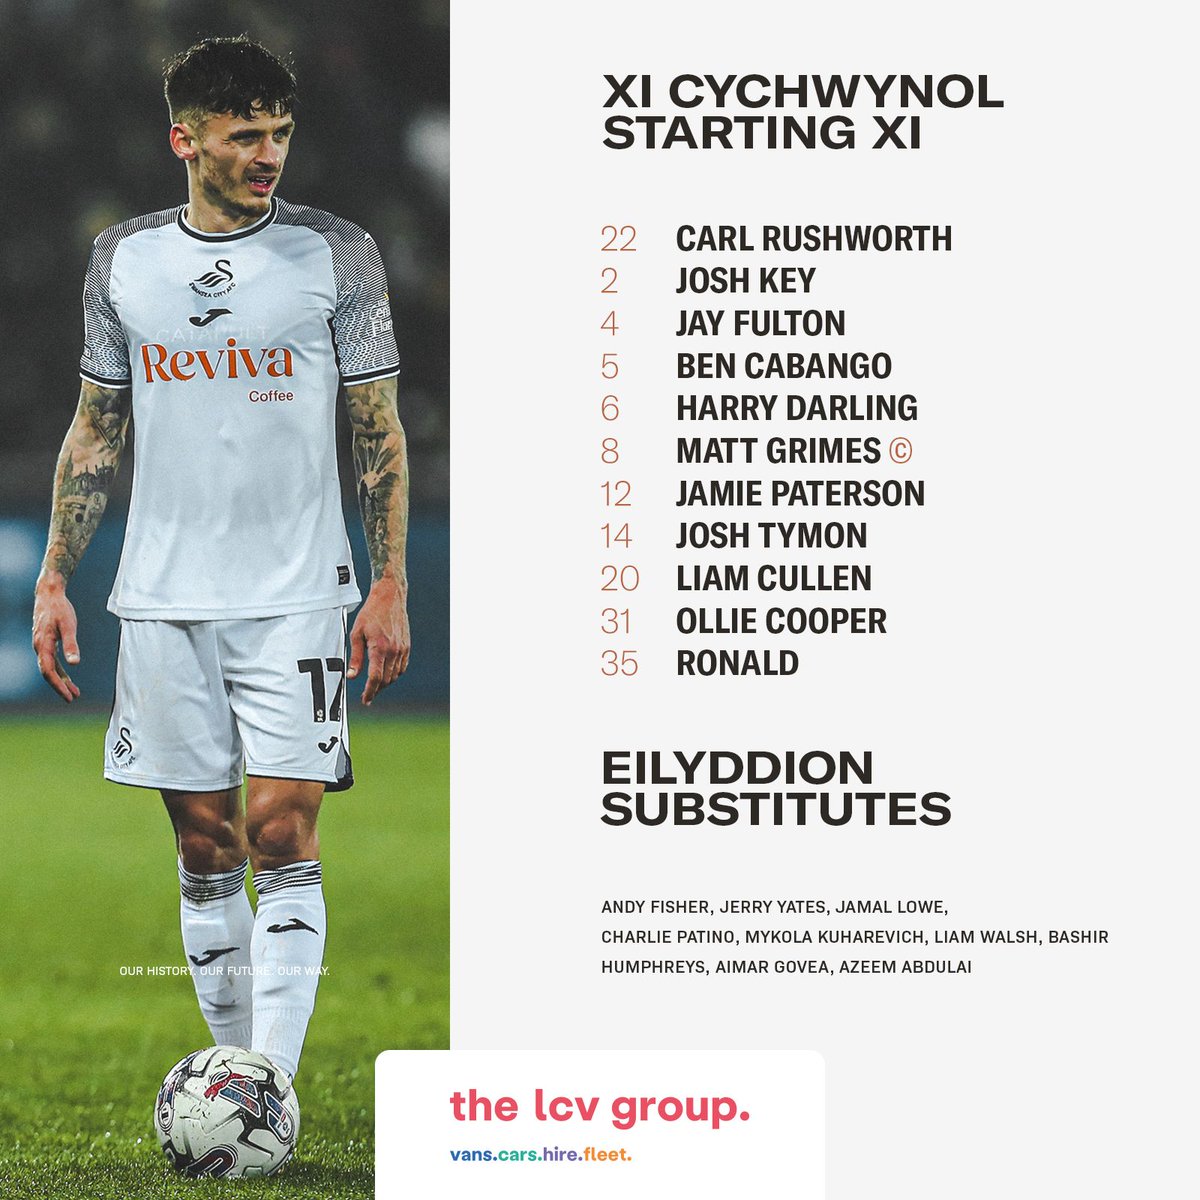 ⚠️ 𝗦𝗧𝗔𝗥𝗧𝗜𝗡𝗚 𝗫𝗜 ⚠️ Here's how the #Swans line up for this afternoon's @SkyBetChamp fixture 🆚 @RotherhamUnited. Brought to you in partnership with @the_lcvgroup.